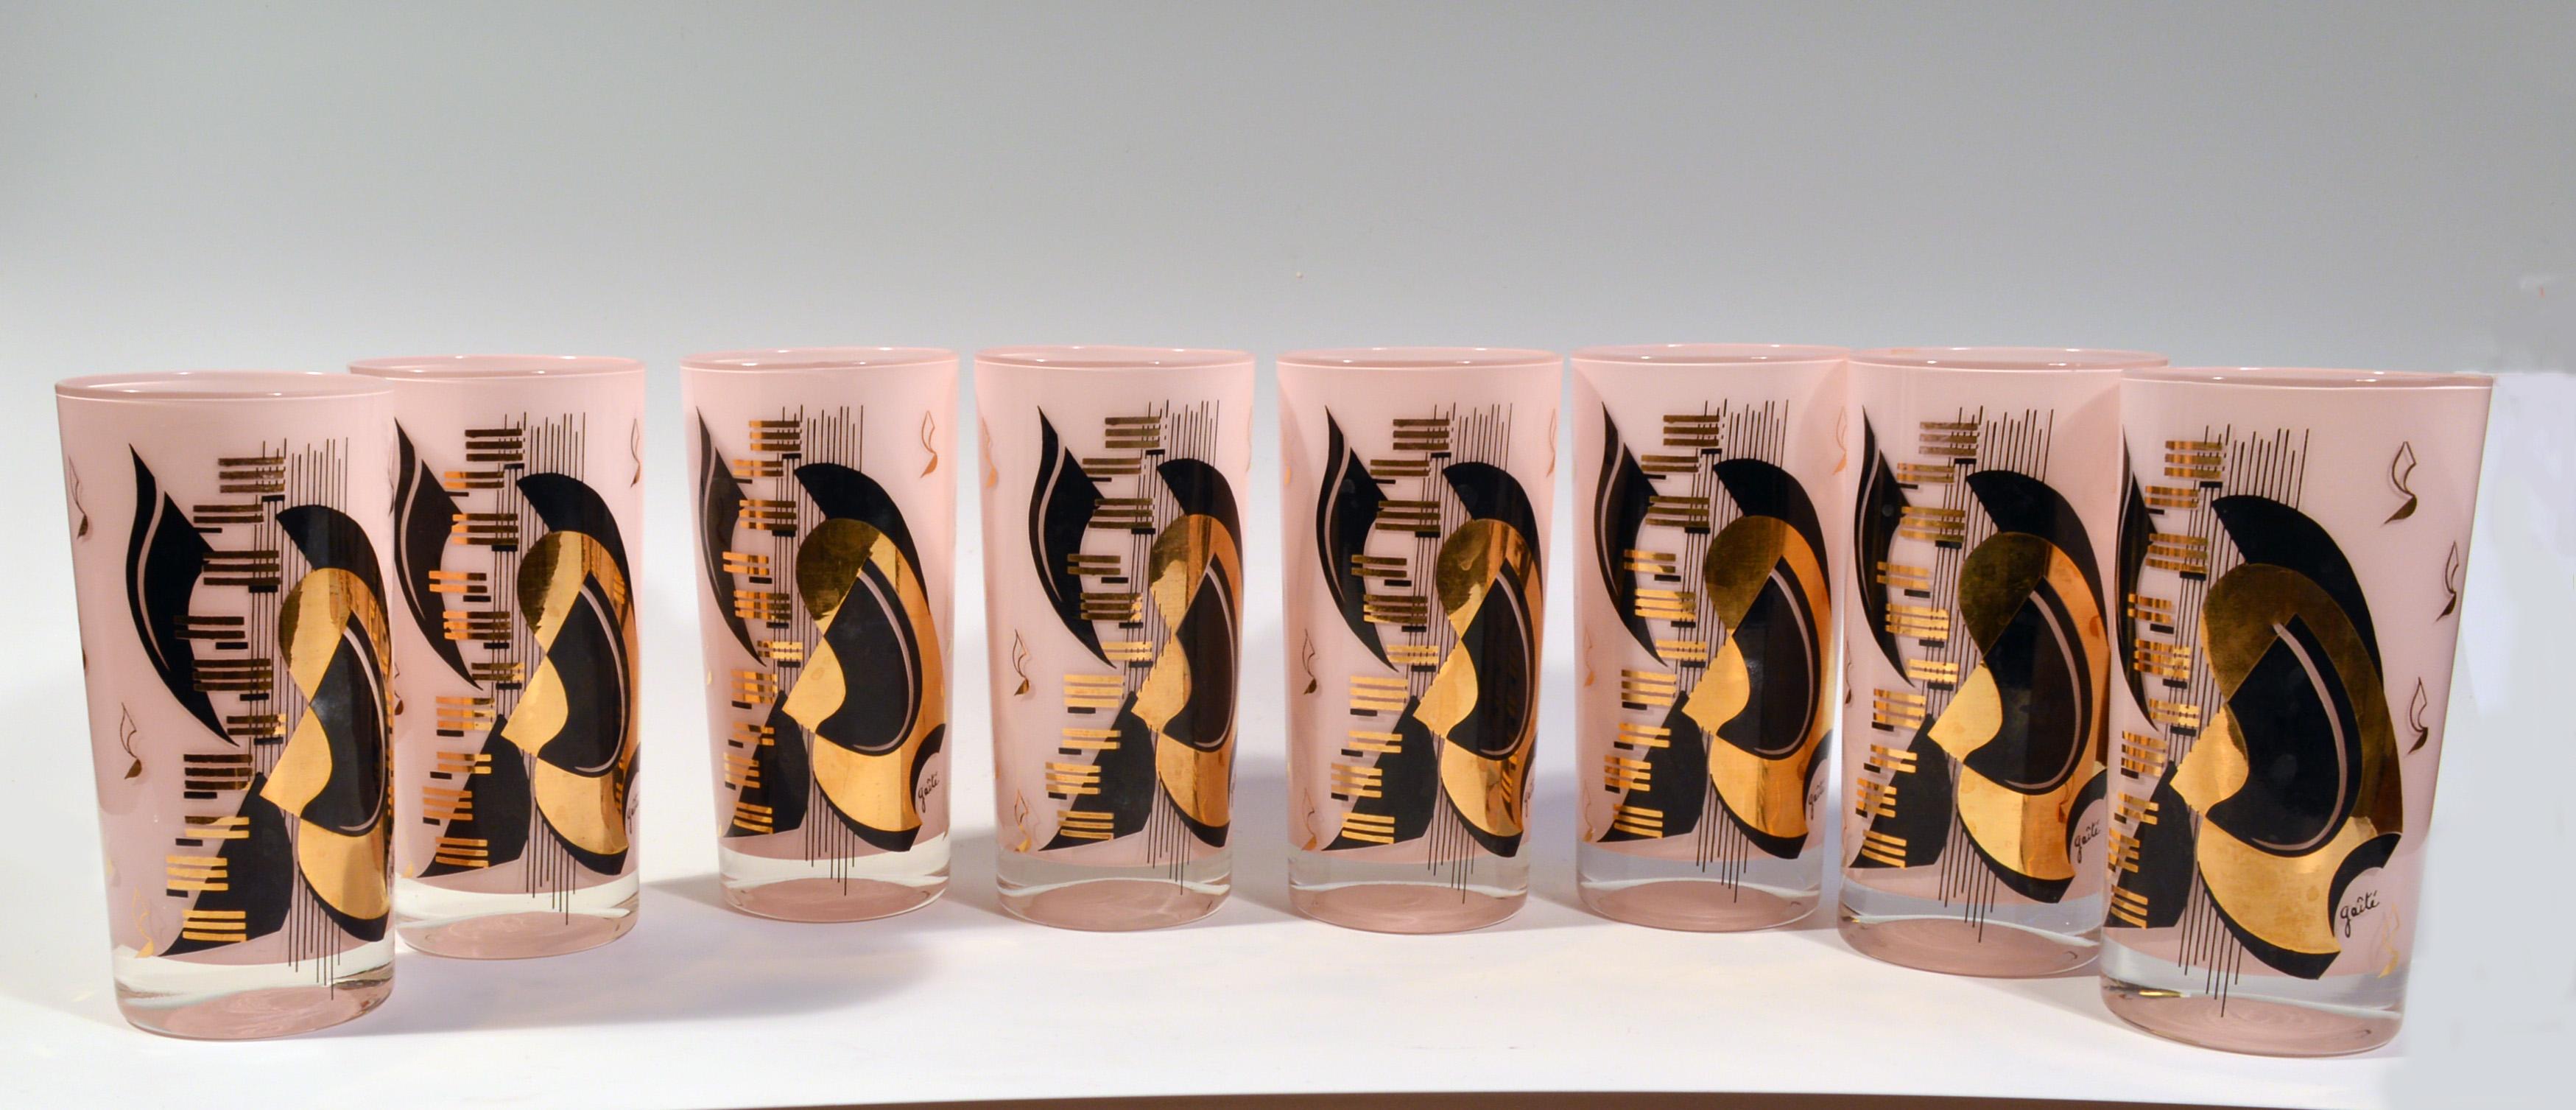 Vintage midcentury music-subject highball glasses, (Eight glasses)
Gay Fad Studios of Lancaster Ohio,
circa 1950s.
(VM99004)

Each glass has black and gold music-inspired design on pink coated glass with scattered music notes on the back and